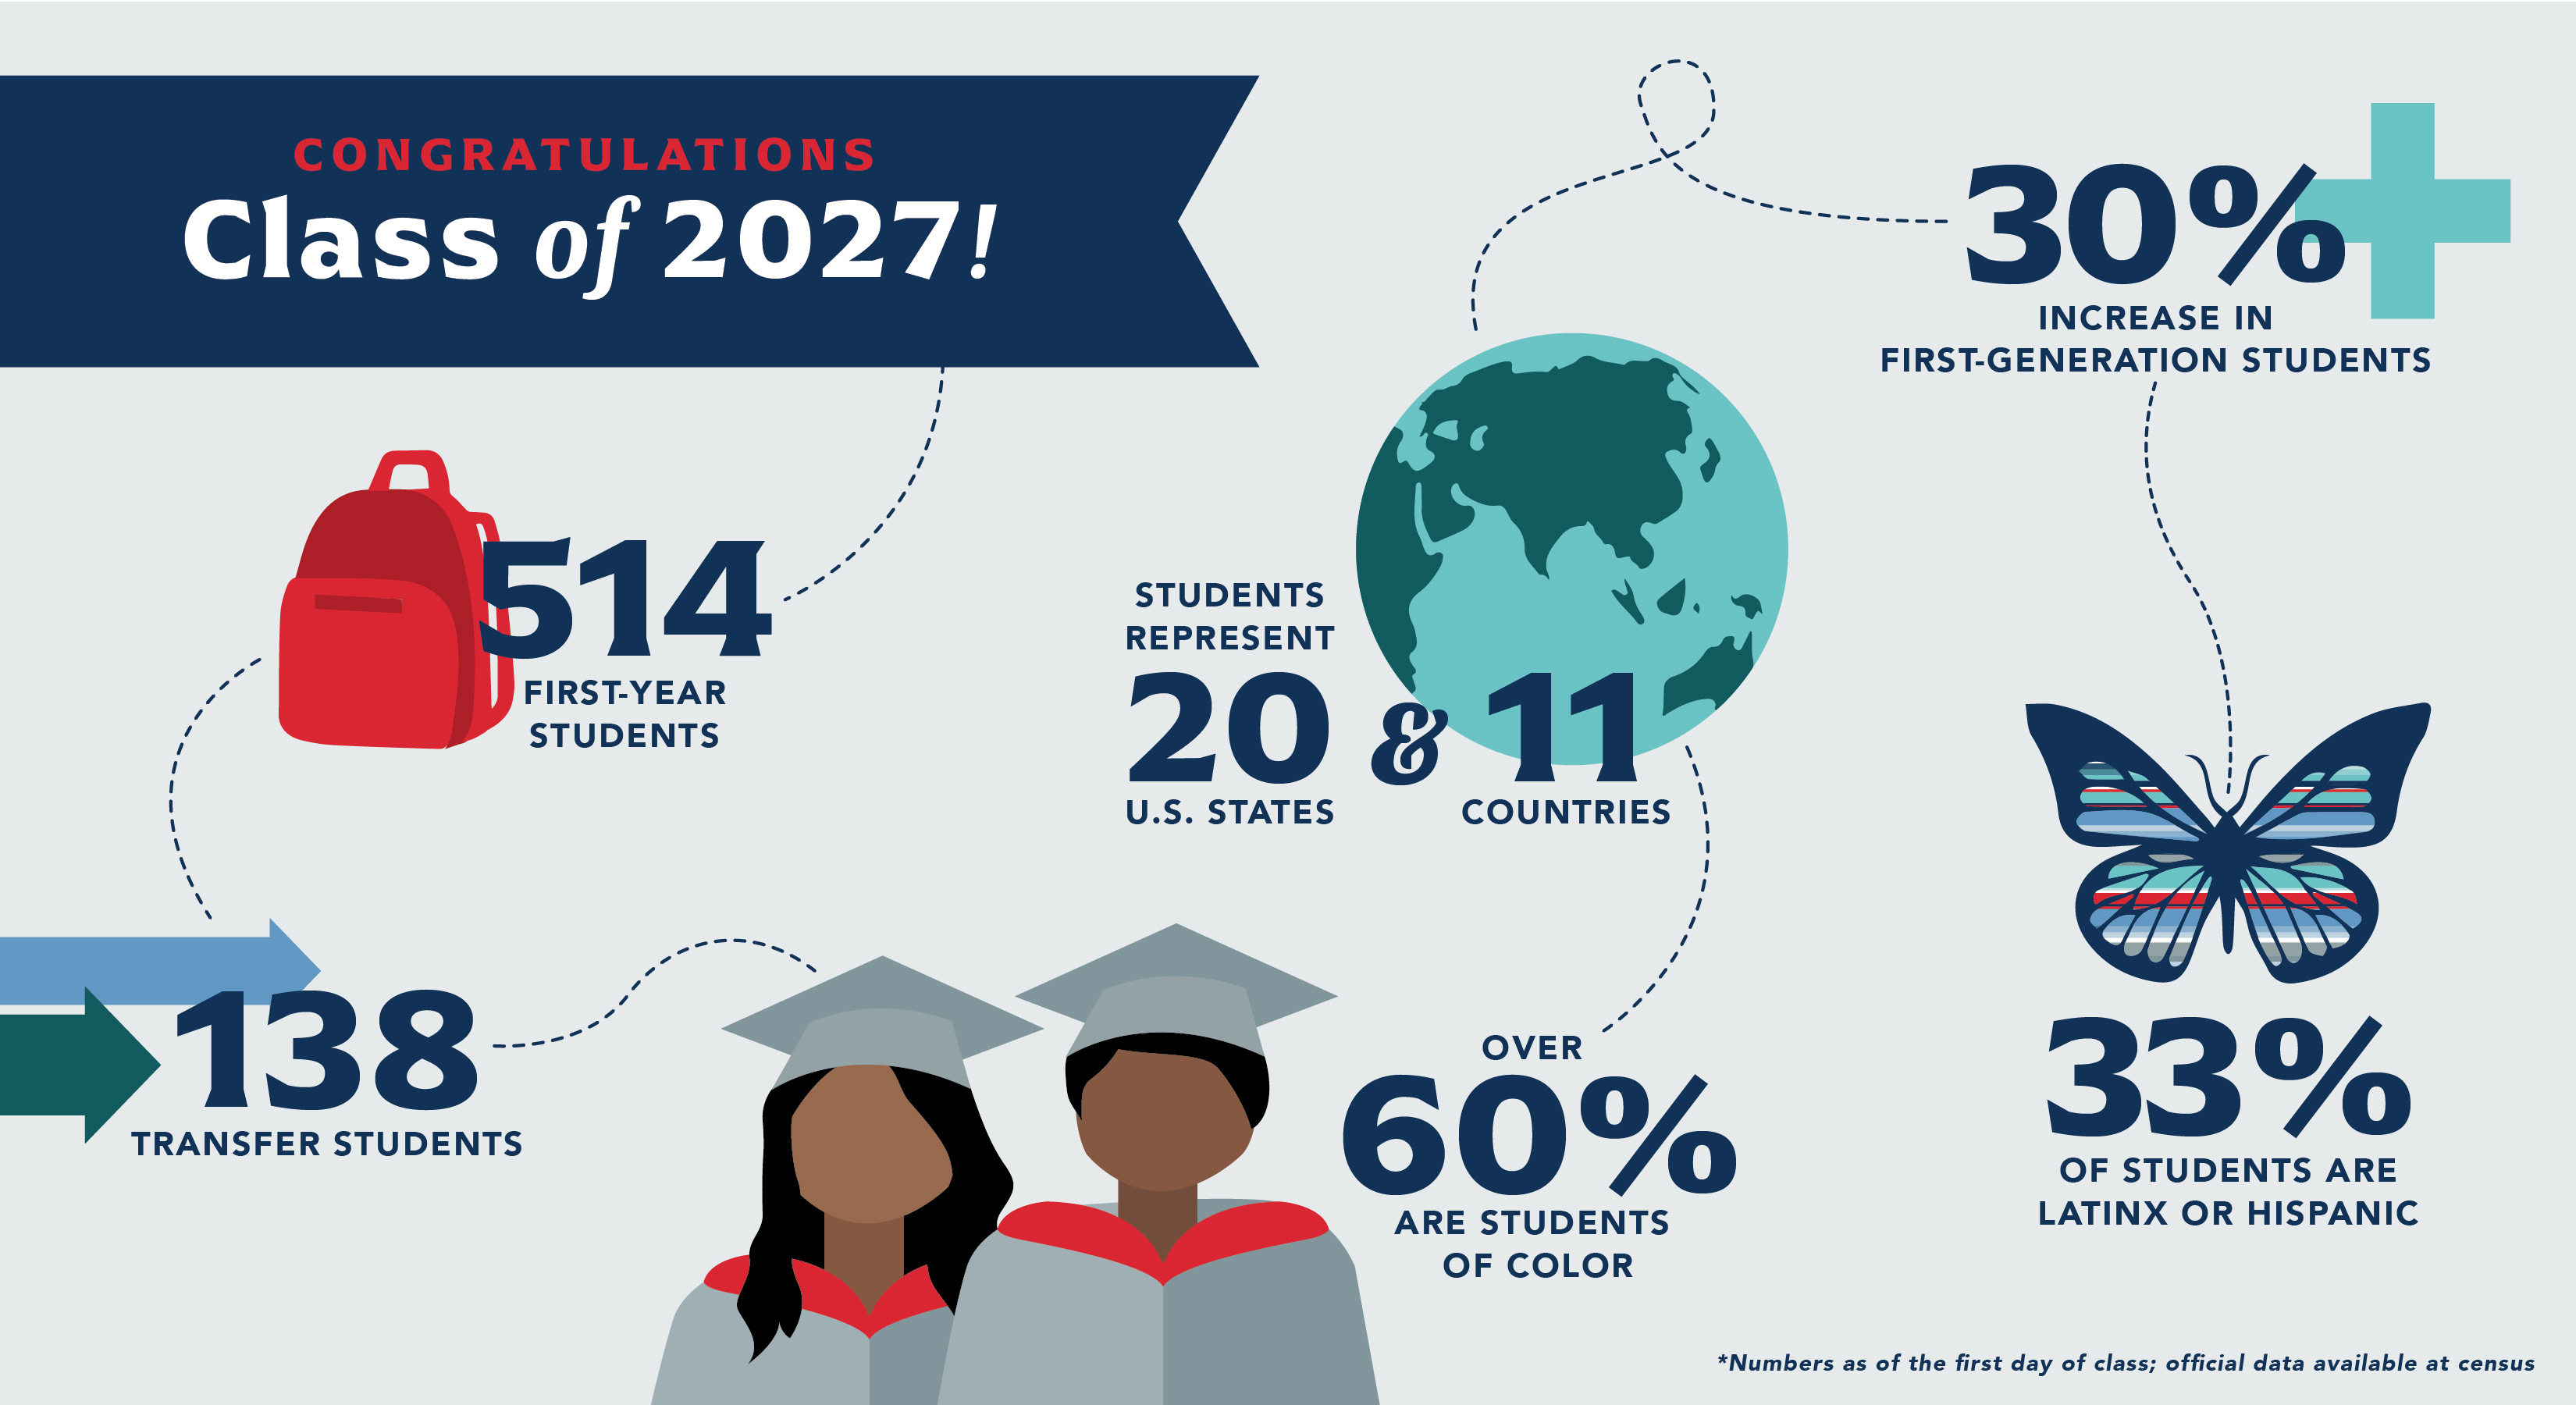 Class of 2027 Graphic with statistics, including: 514 first-year students, 138 transfer students